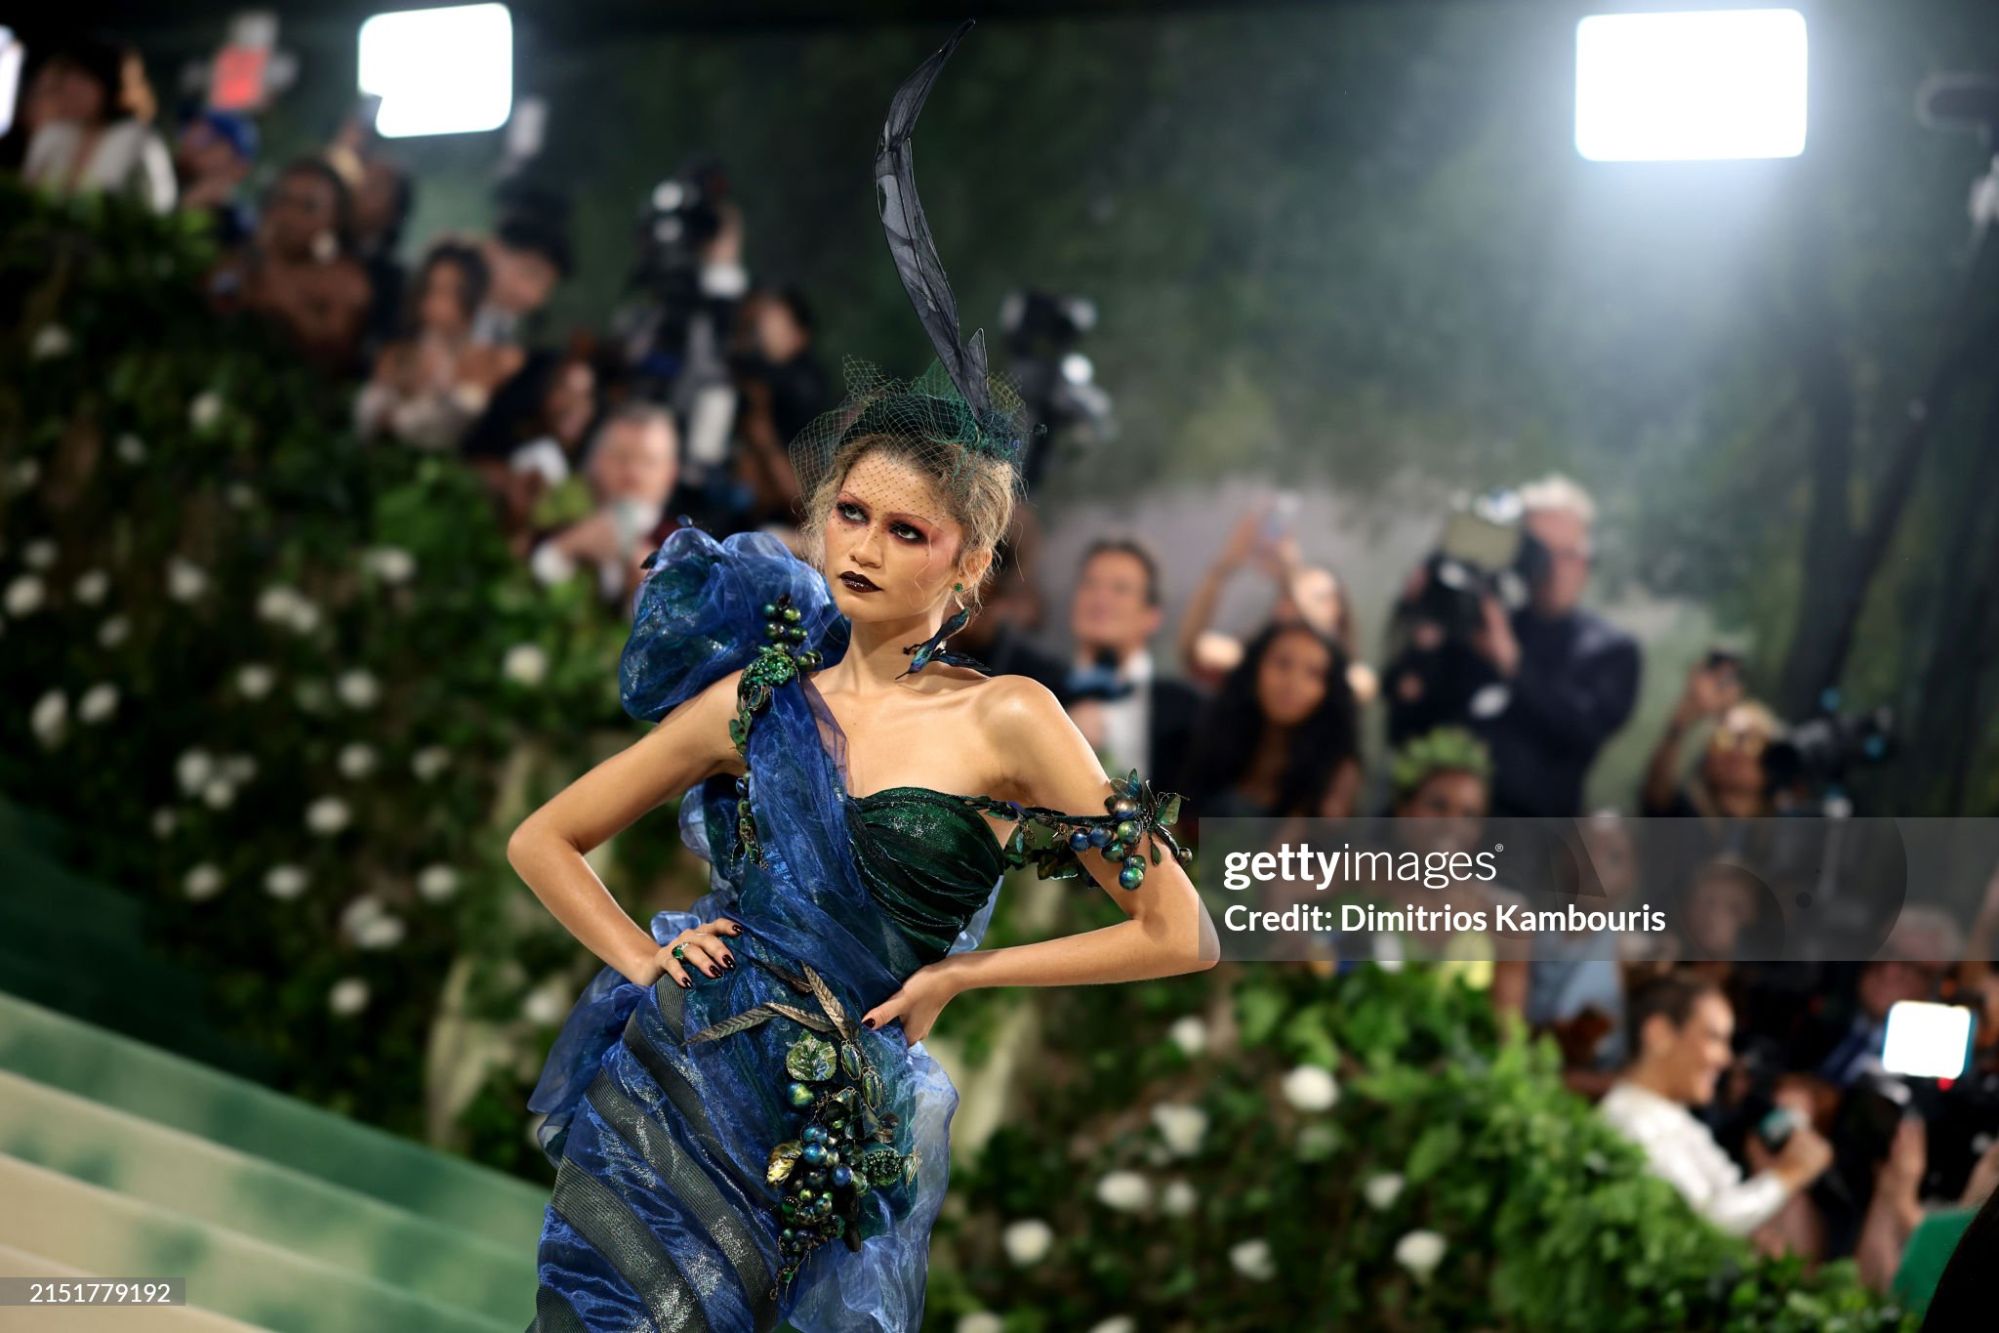 gettyimages-2151779192-2048x2048.jpg